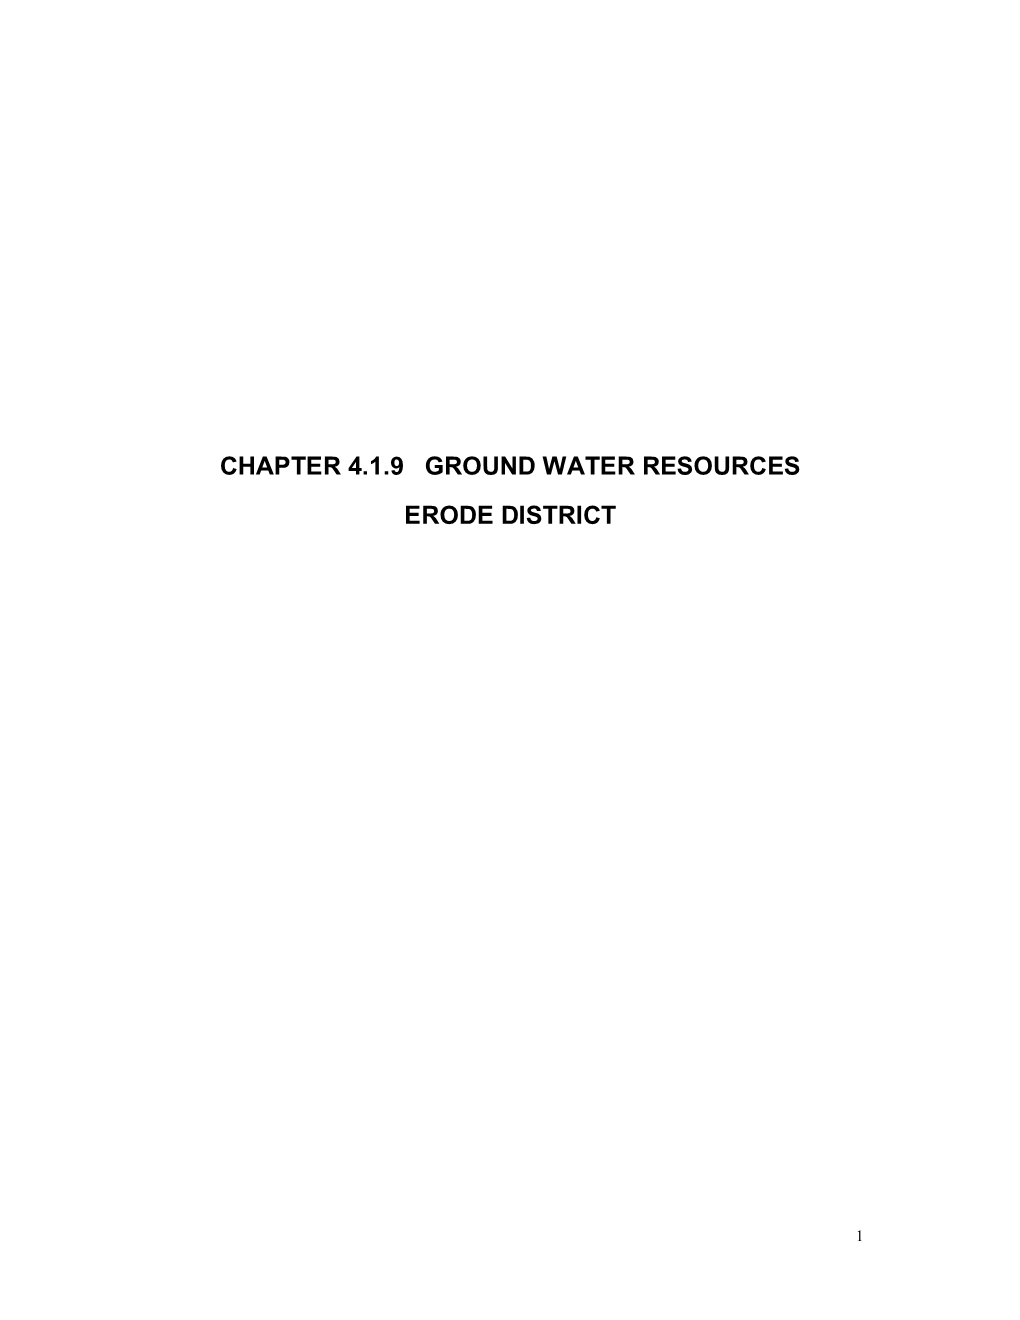 Chapter 4.1.9 Ground Water Resources Erode District